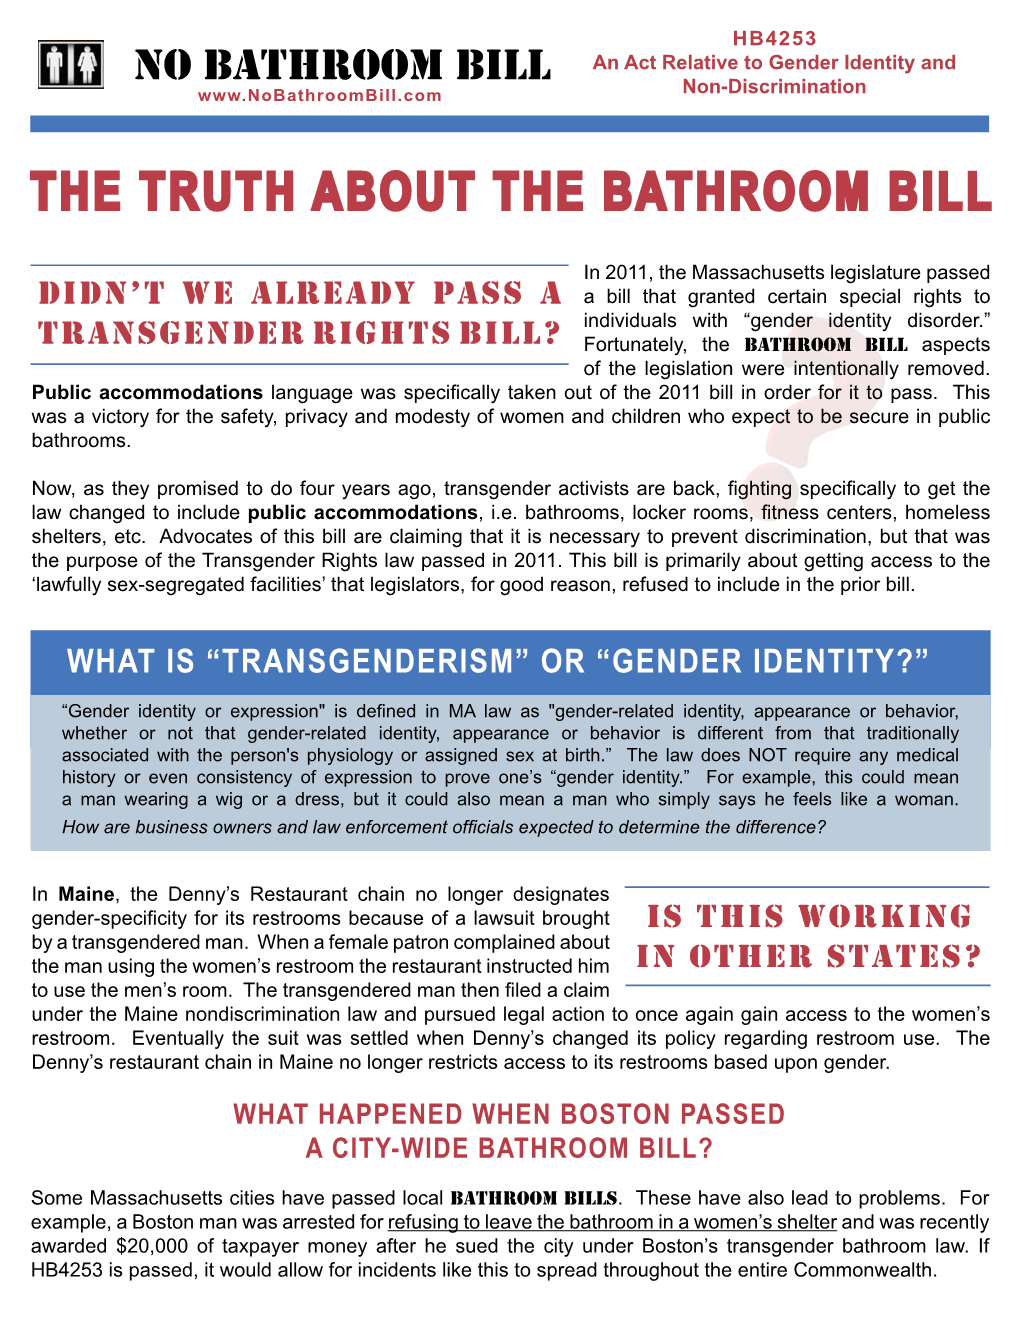 The Truth About the Bathroom Bill What Is “Transgenderism” Or “Gender Identity?”